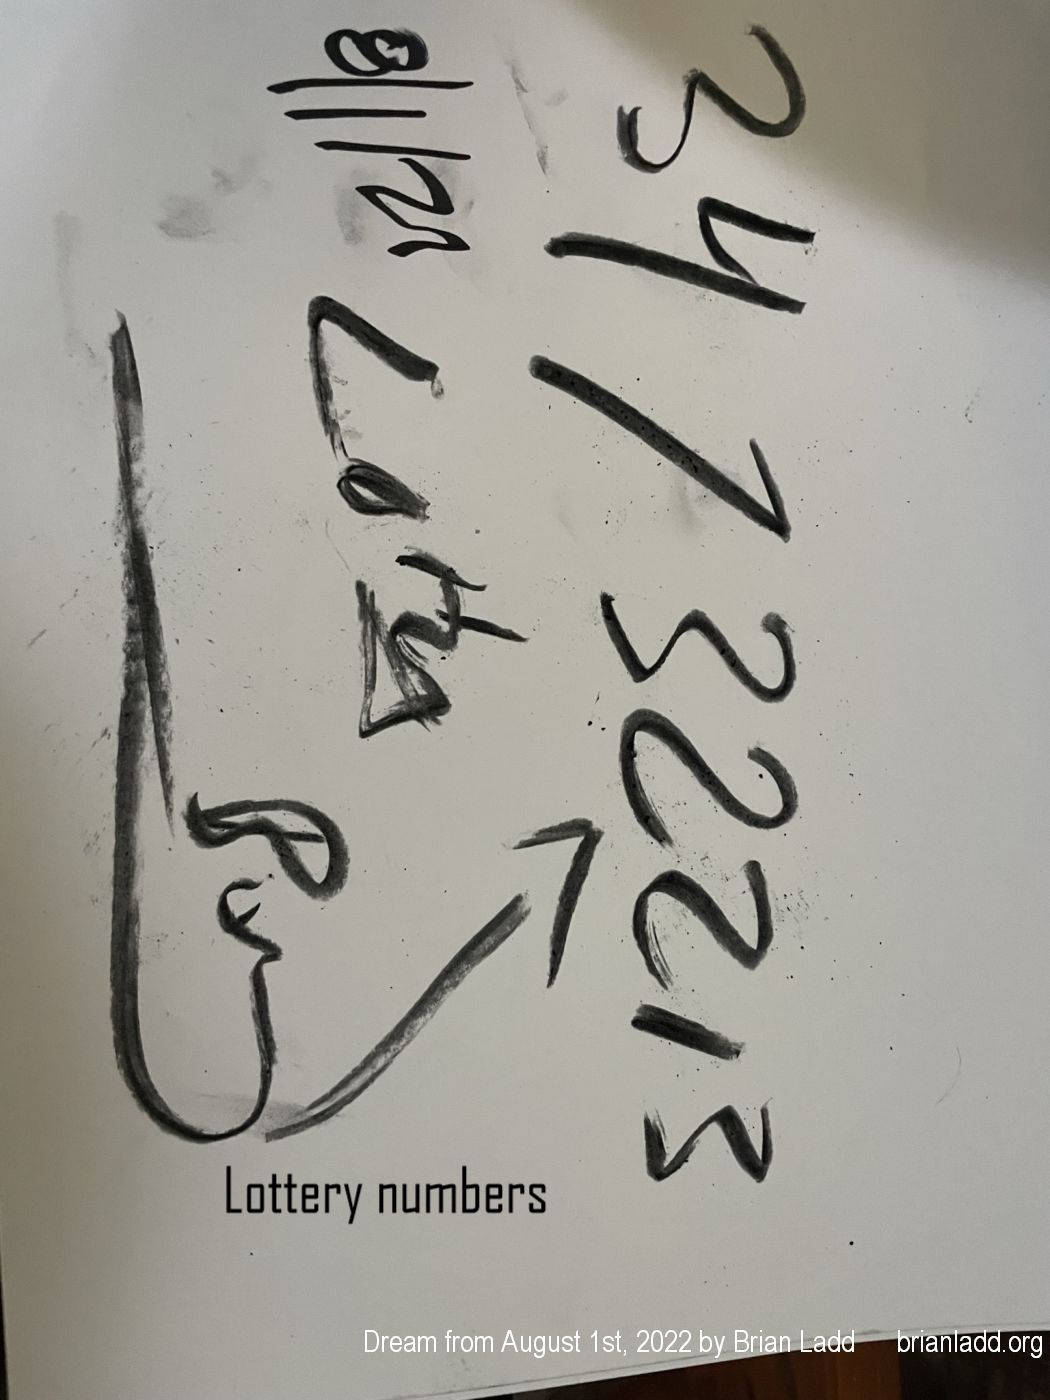 1 August 2022 1  Lottery numbers...
Lottery numbers.

